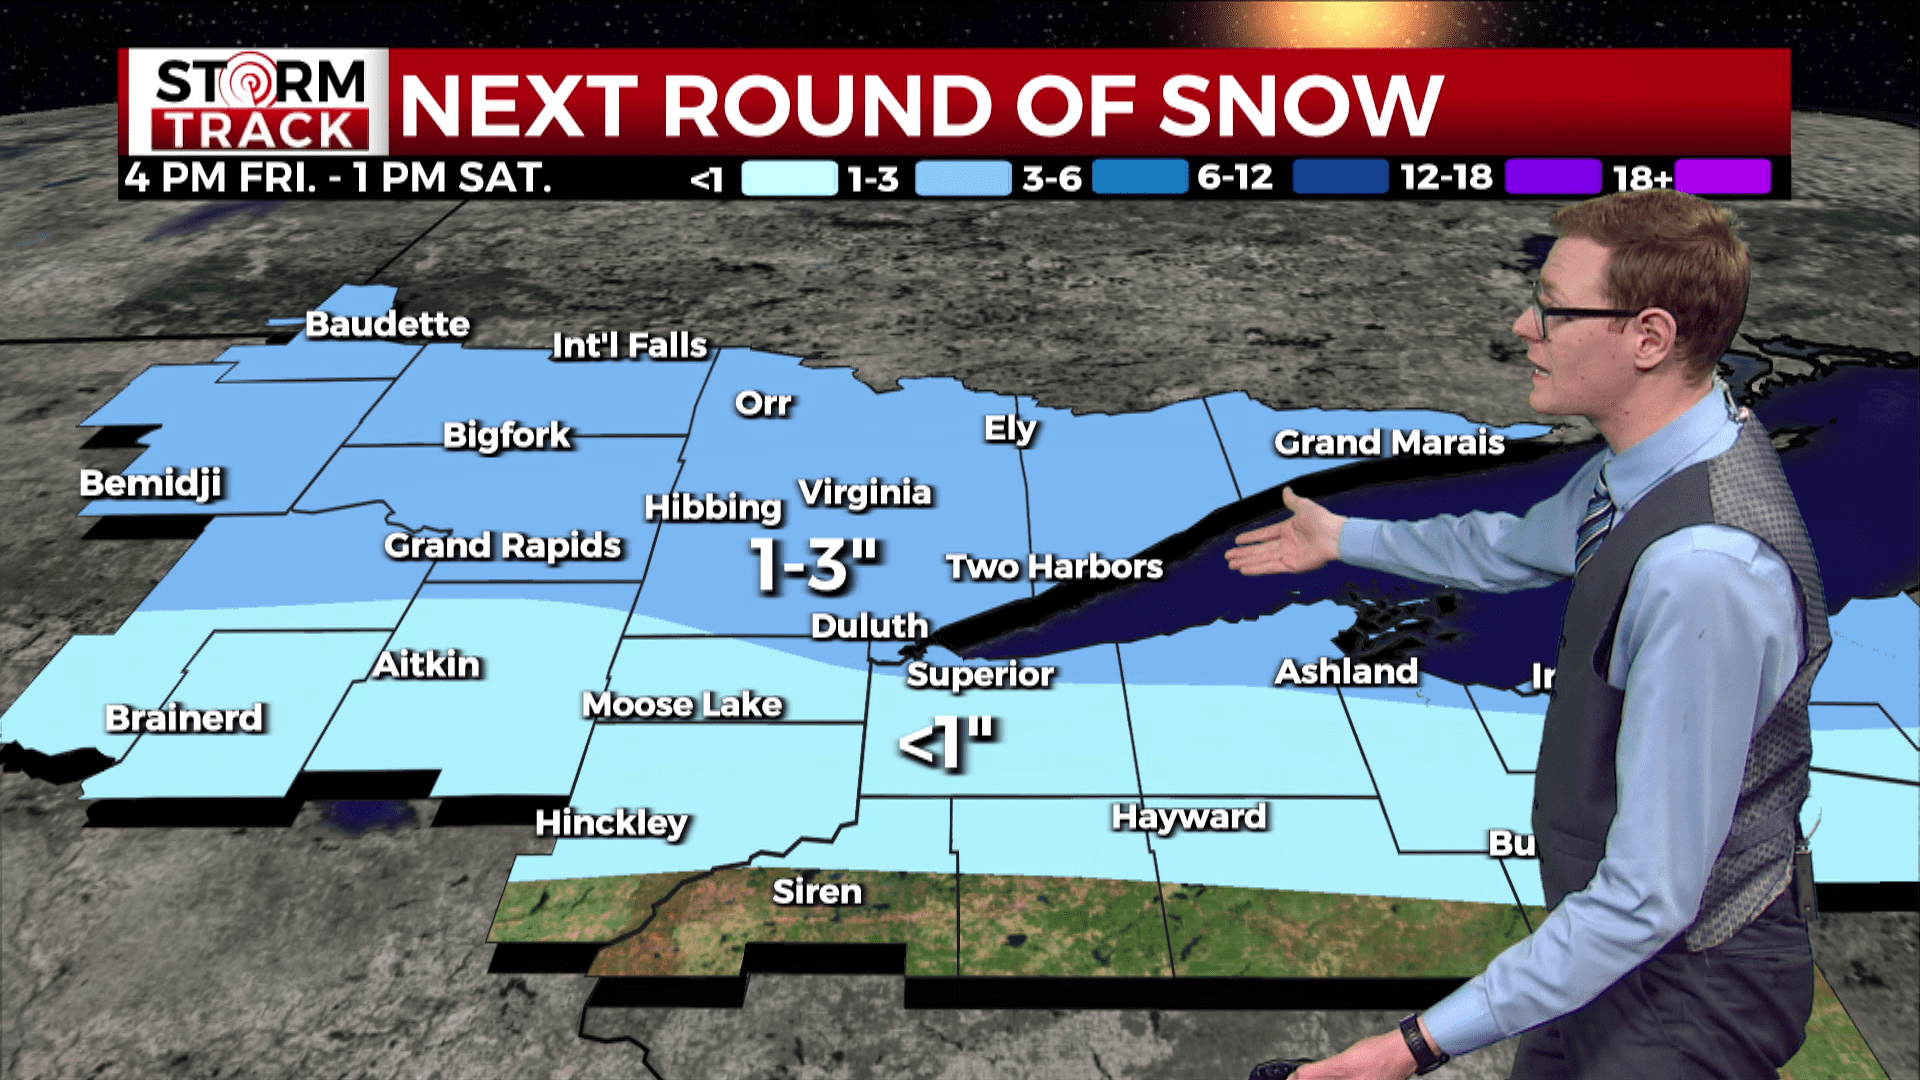 Brandon showing expected snow amounts